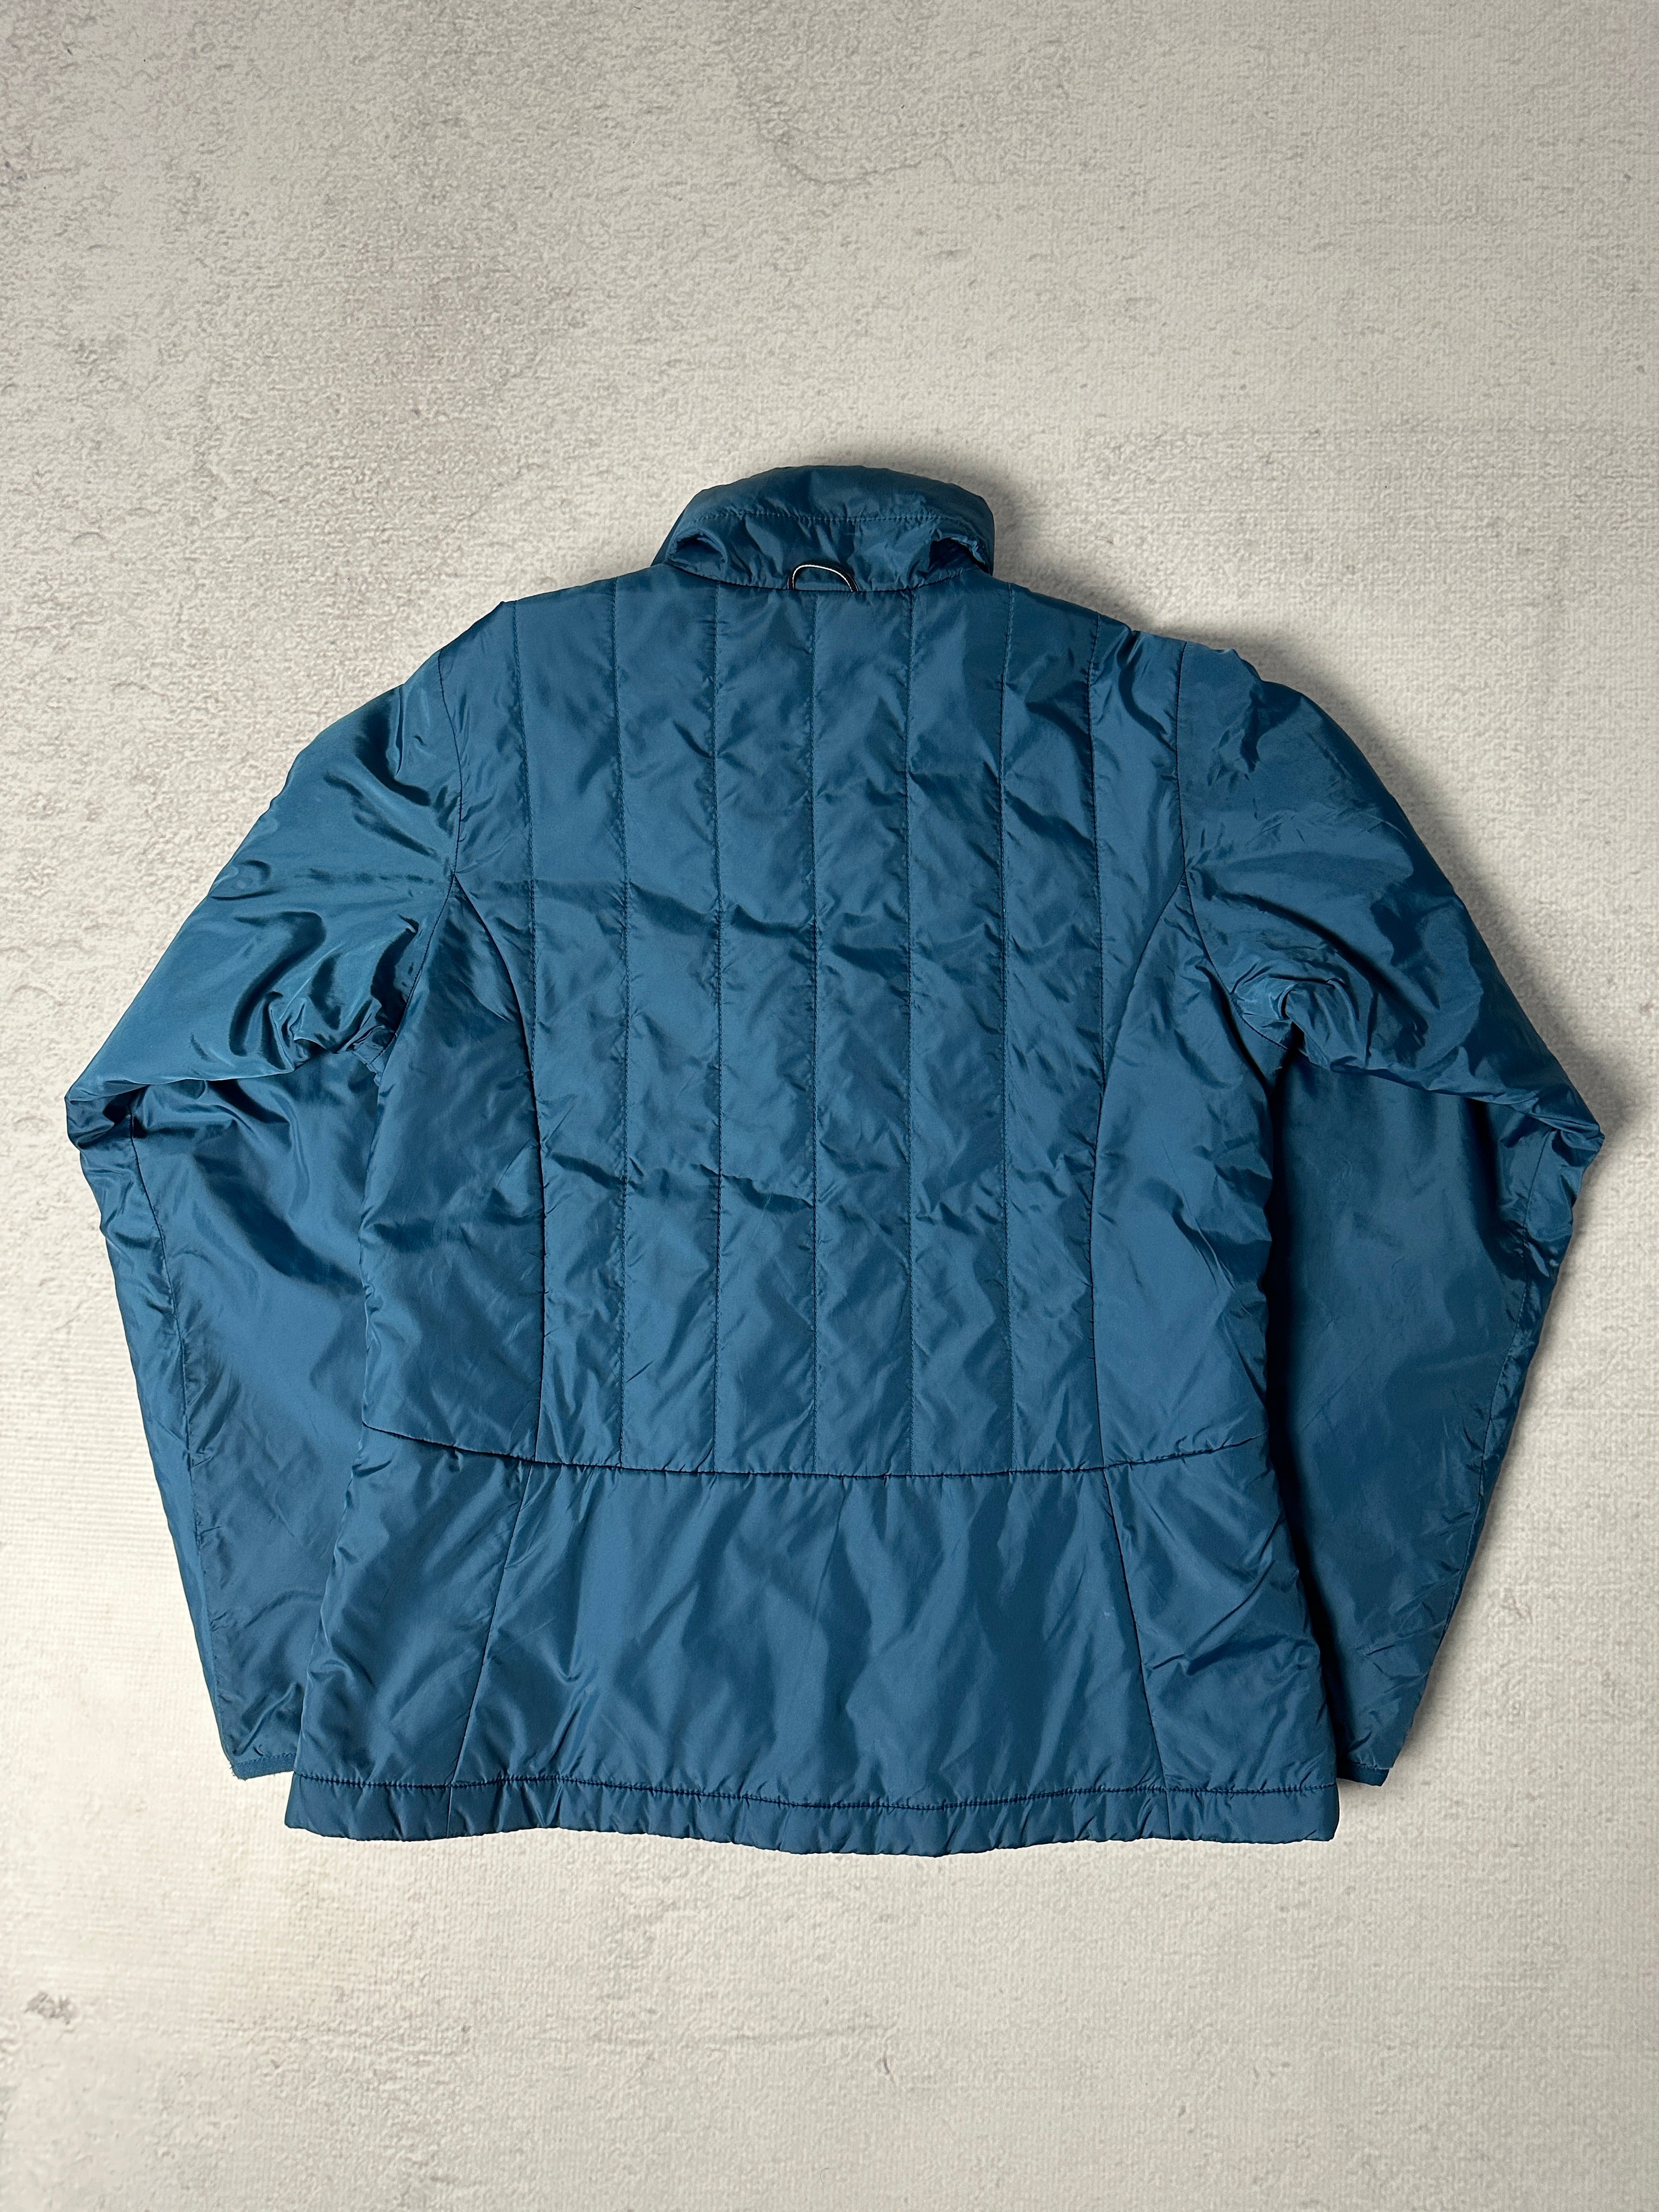 Vintage The North Face Insulated Jacket - Women's Medium